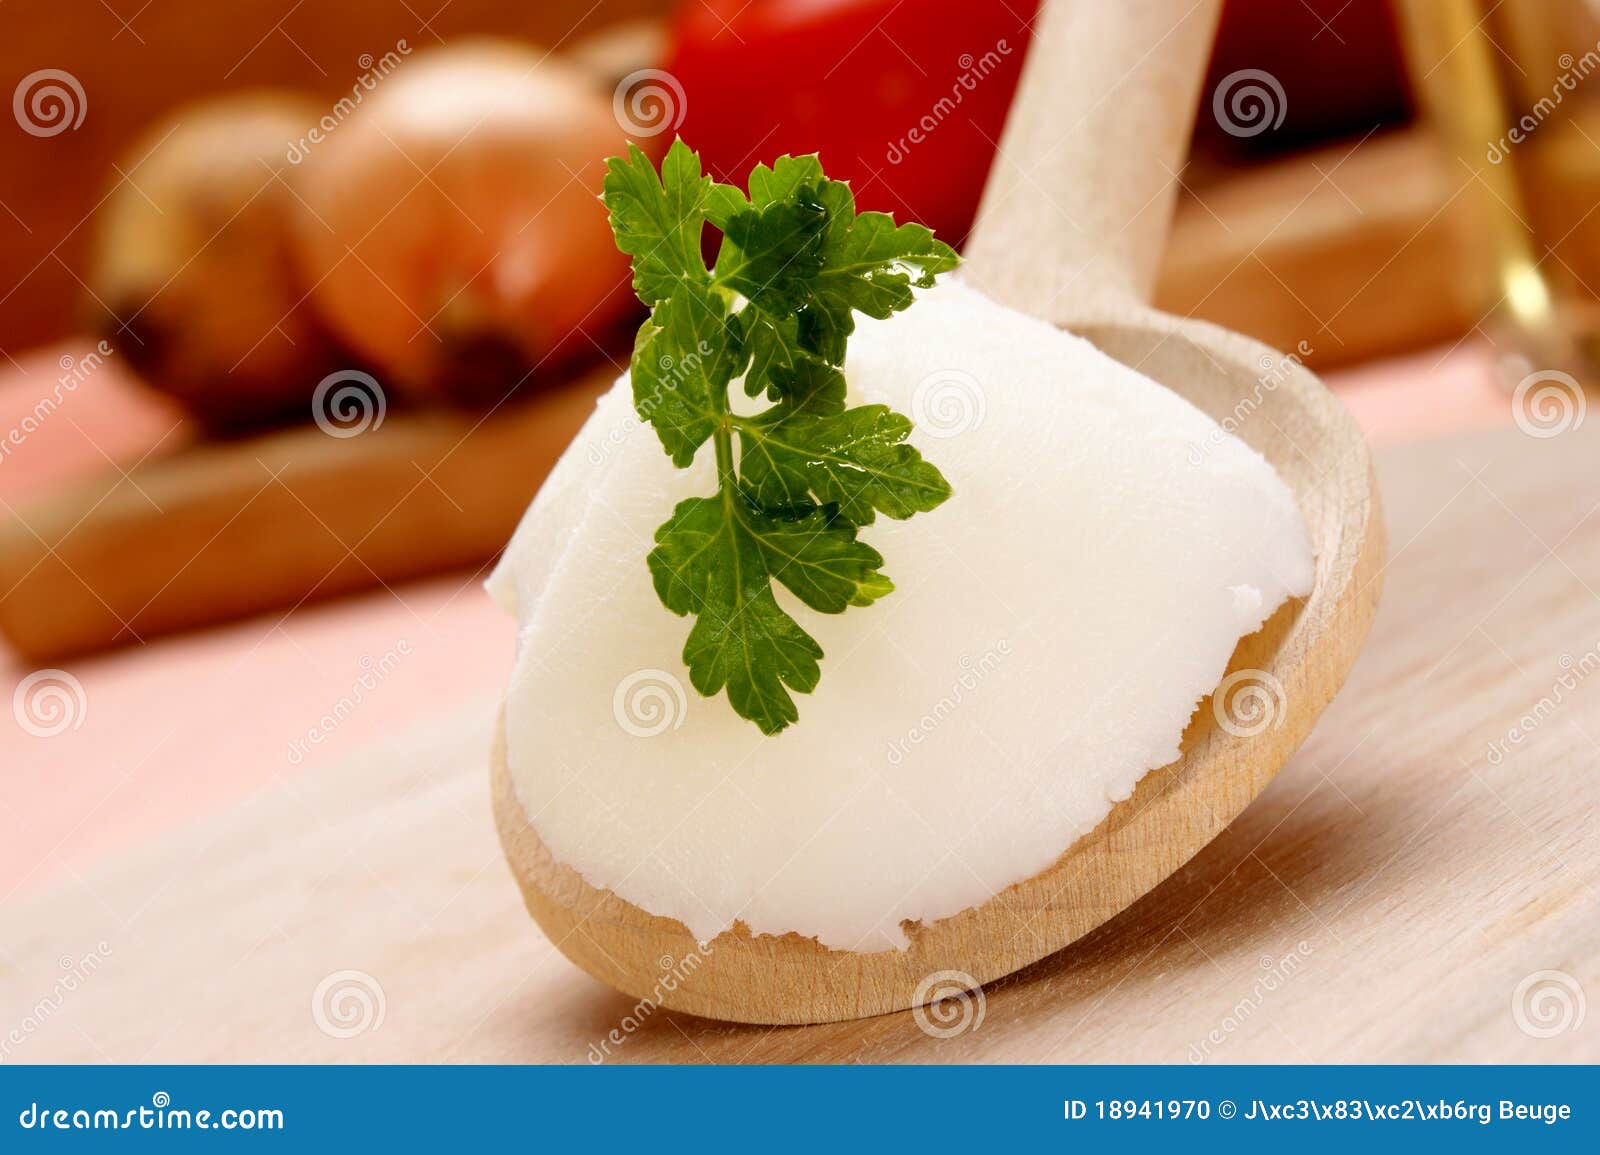  Lard  With Parsley On A Wooden Spoon  Stock Photo Image of 